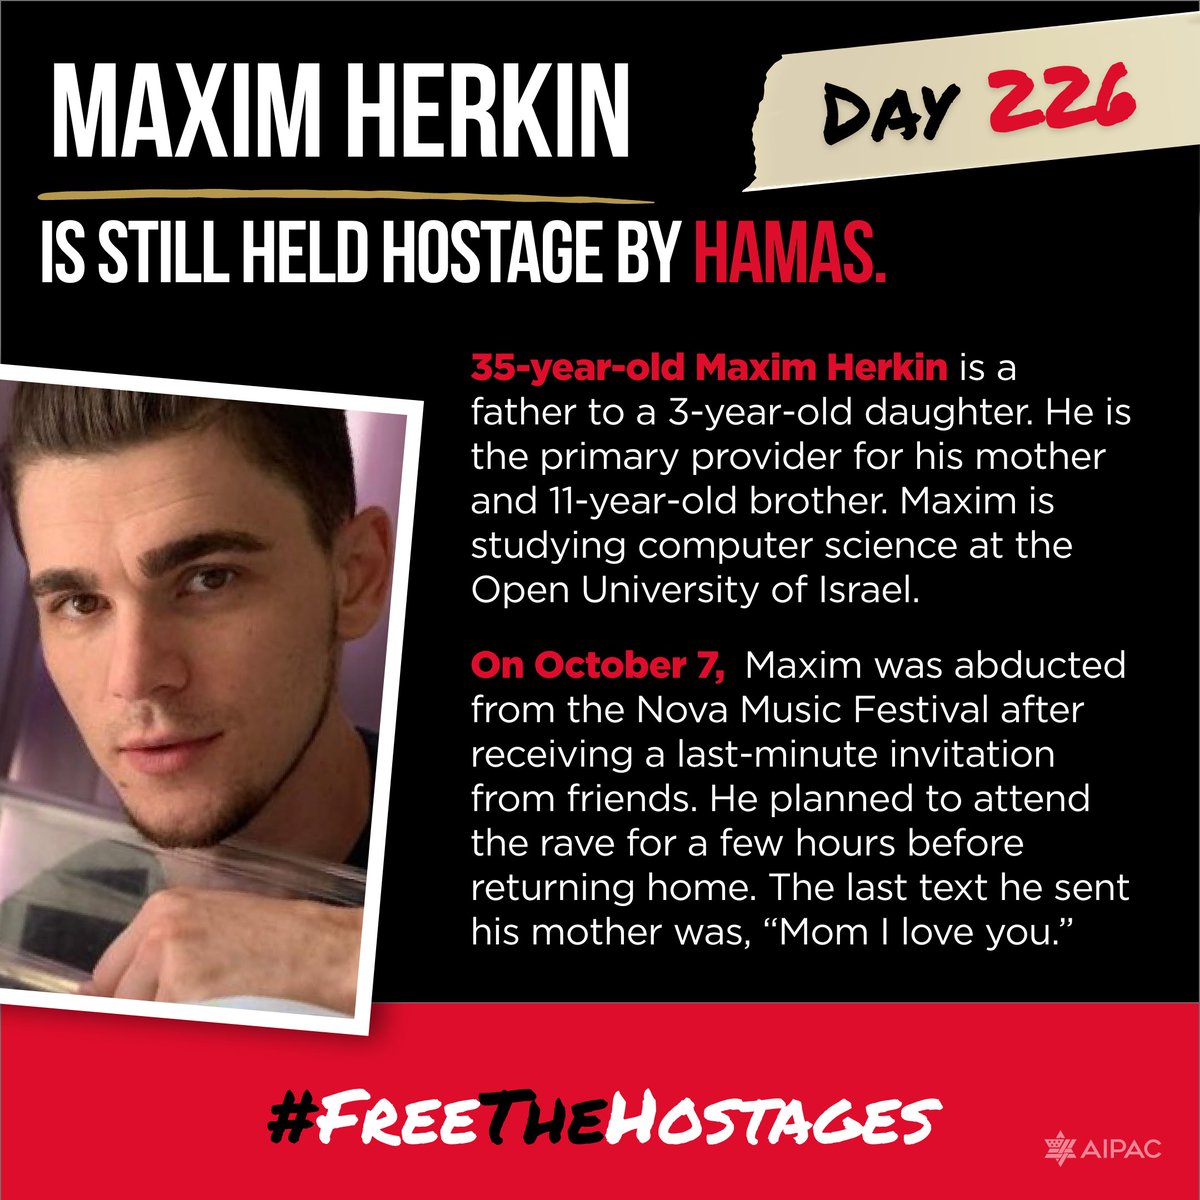 226 days. Maxim Herkin is still held hostage by Hamas. Share his story. #FreeTheHostages

@bringhomenow